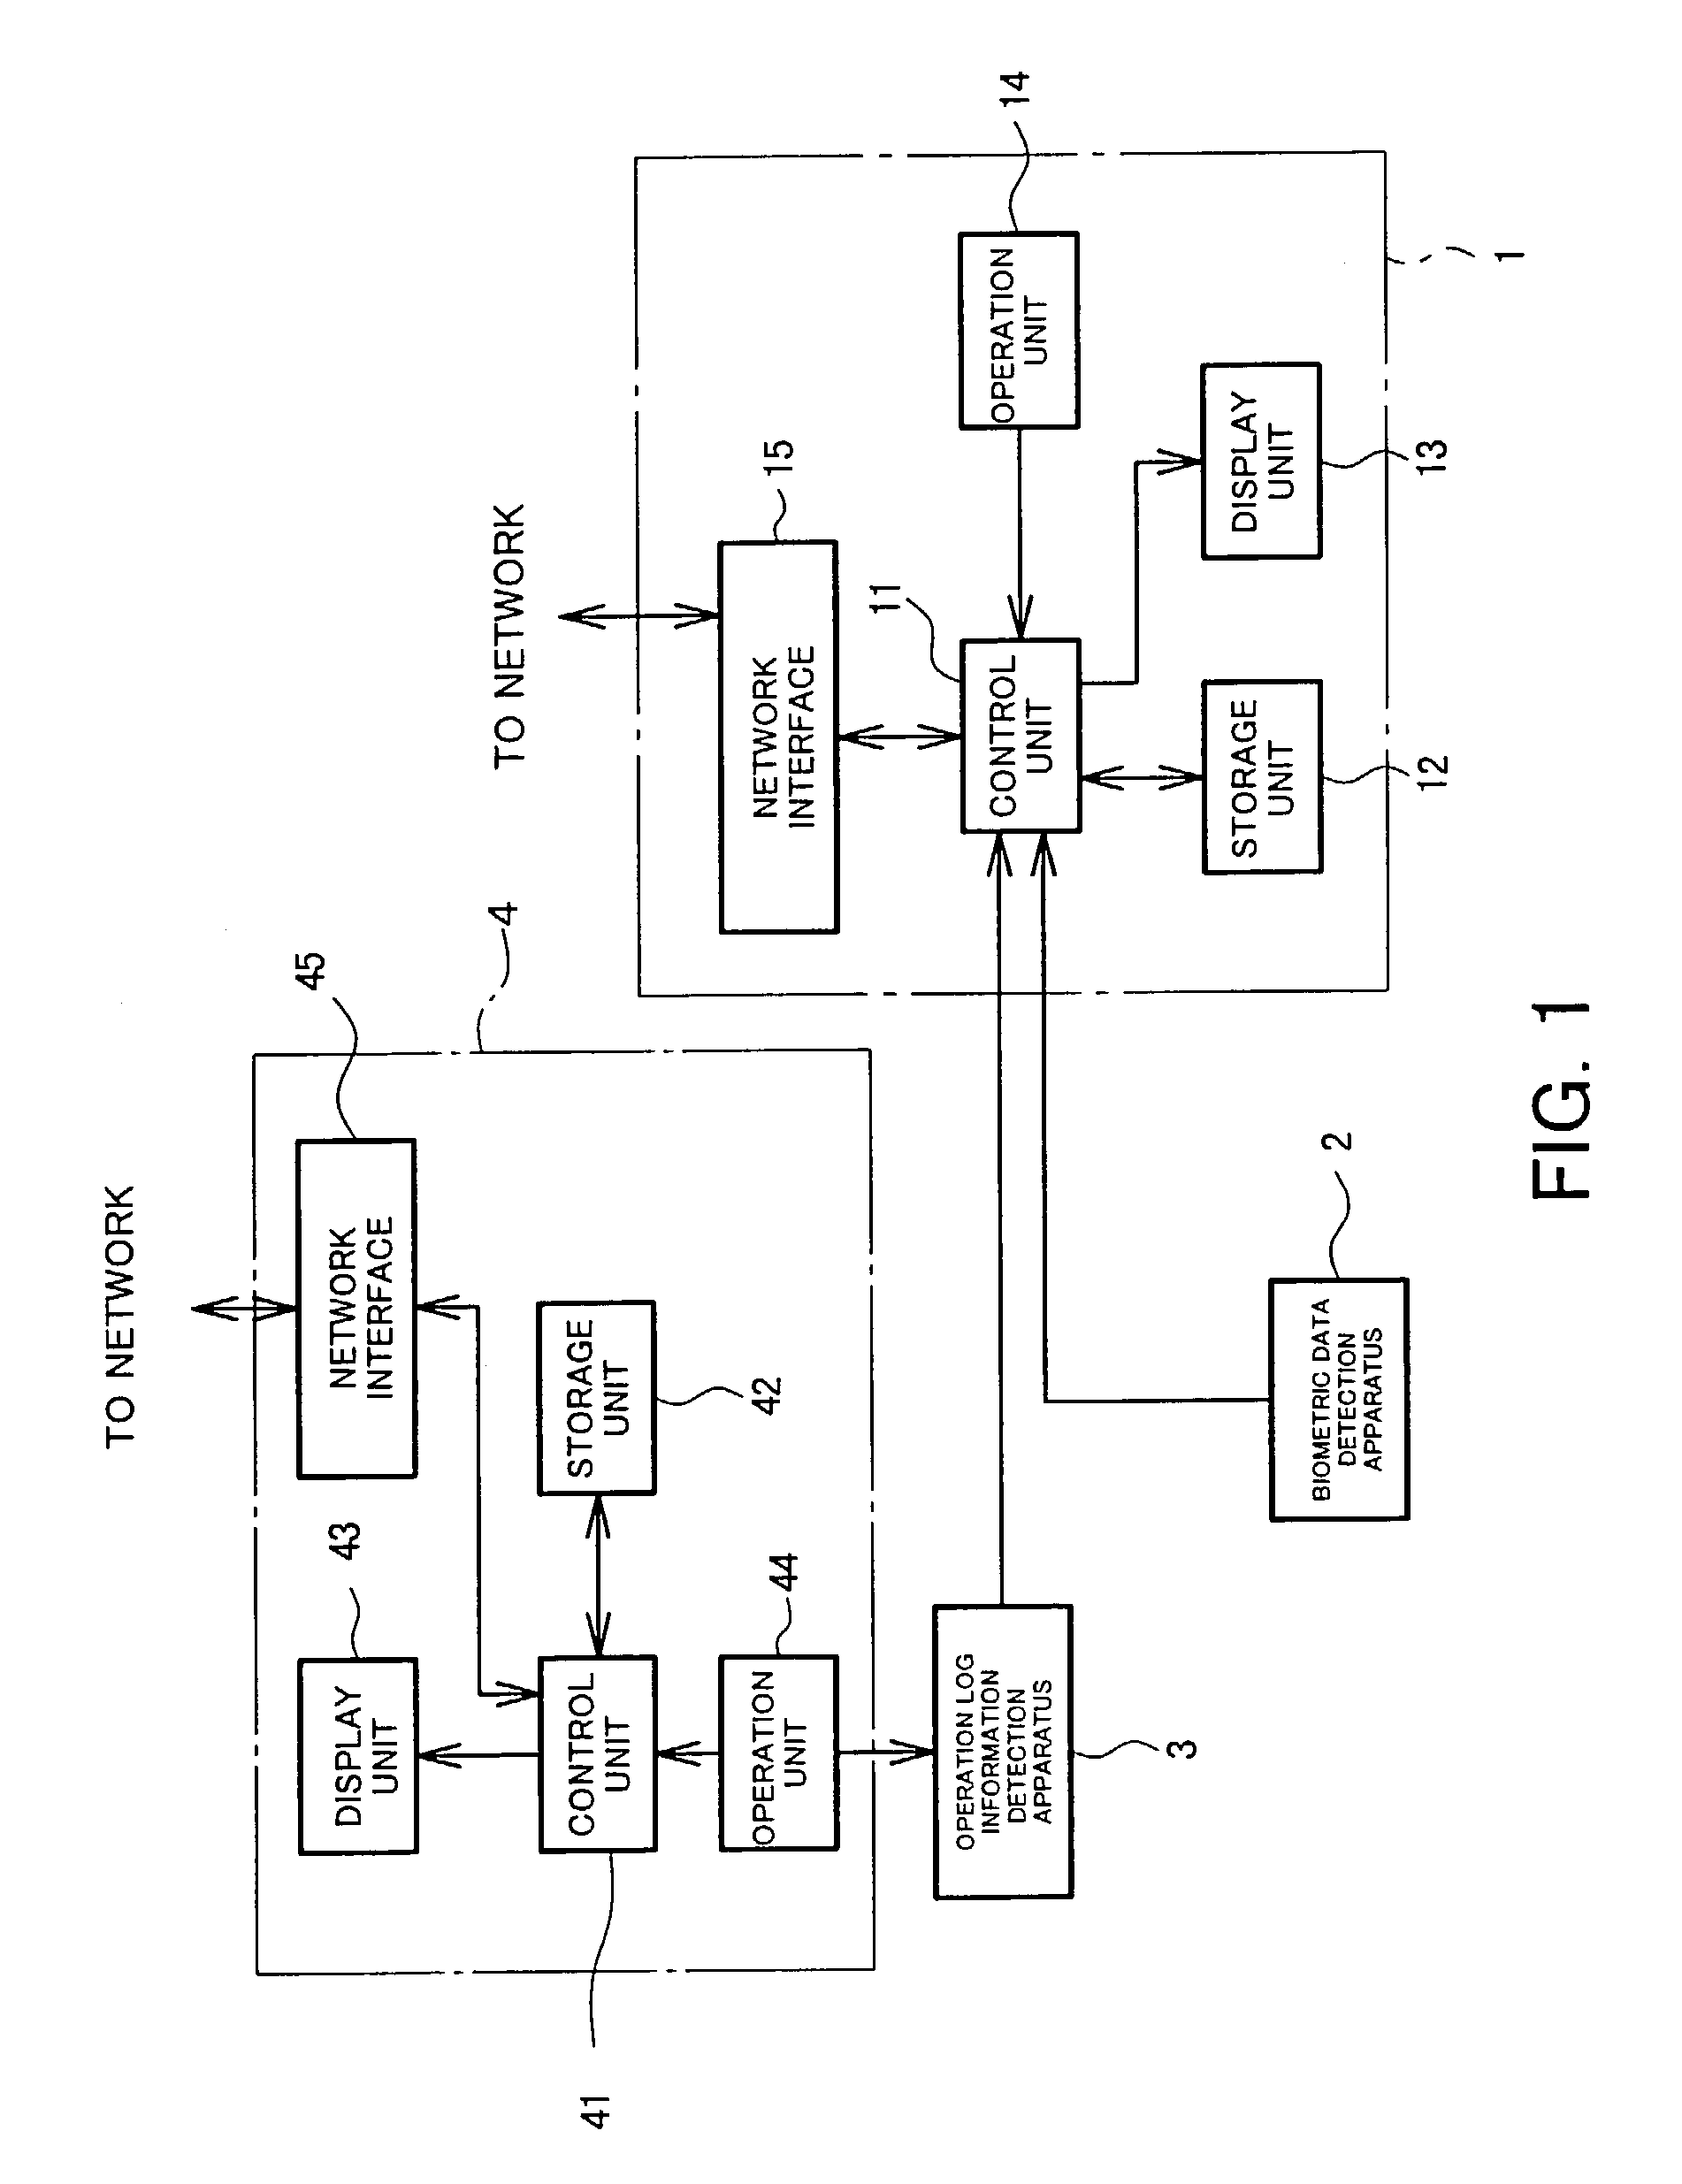 Usability evaluation support apparatus and method